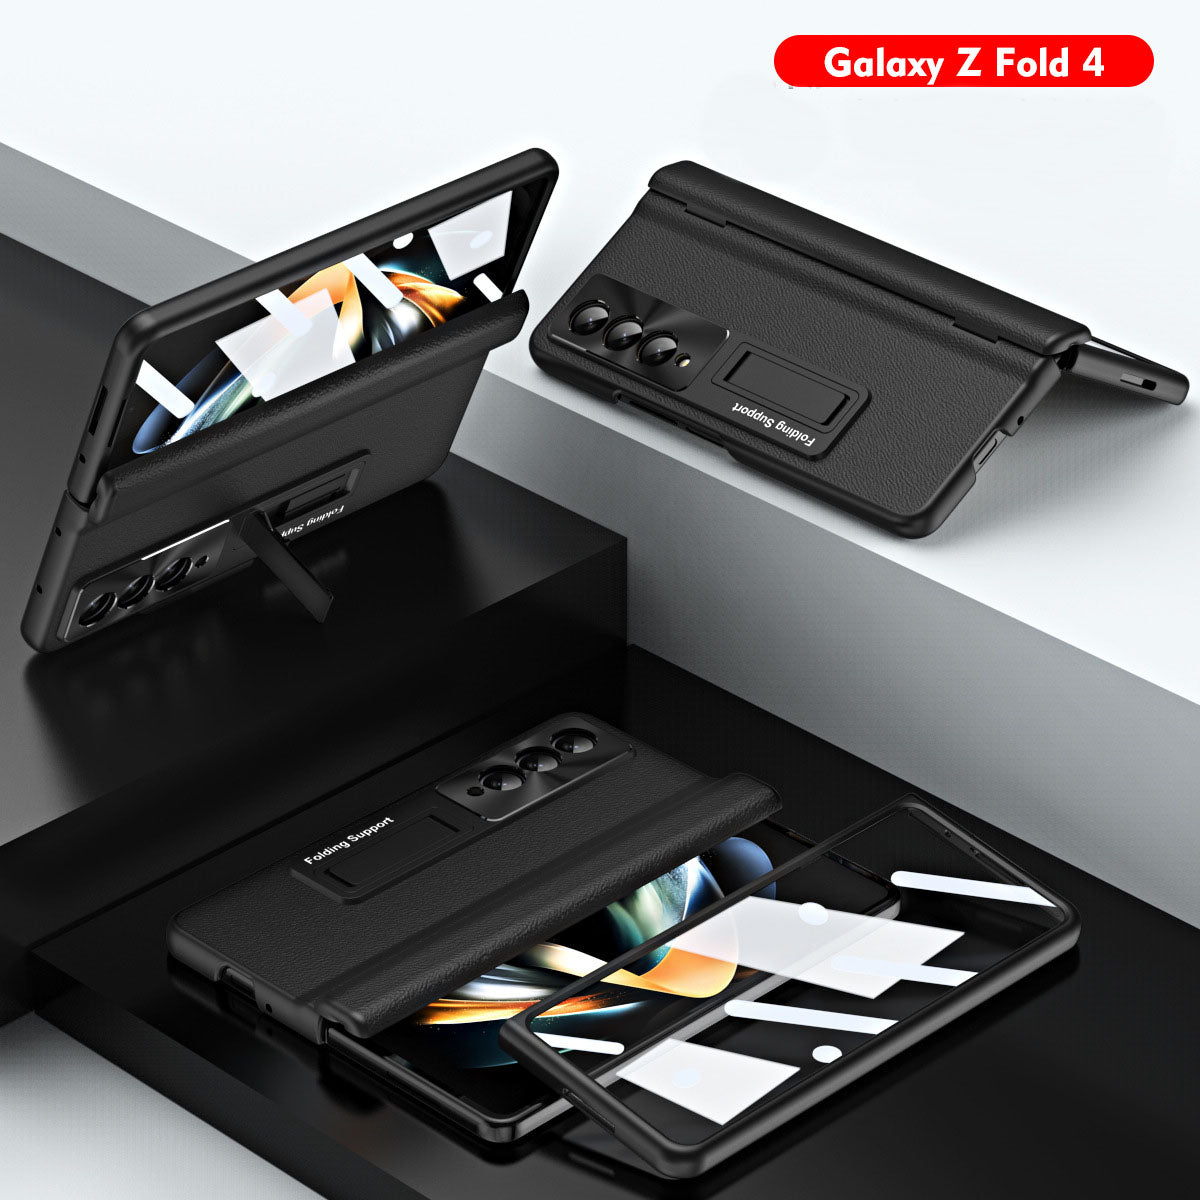 Luxury Leather Samsung Galaxy Z Fold5 Fold4 Fold3 Case with Screen Protector/Stand/Pen slot